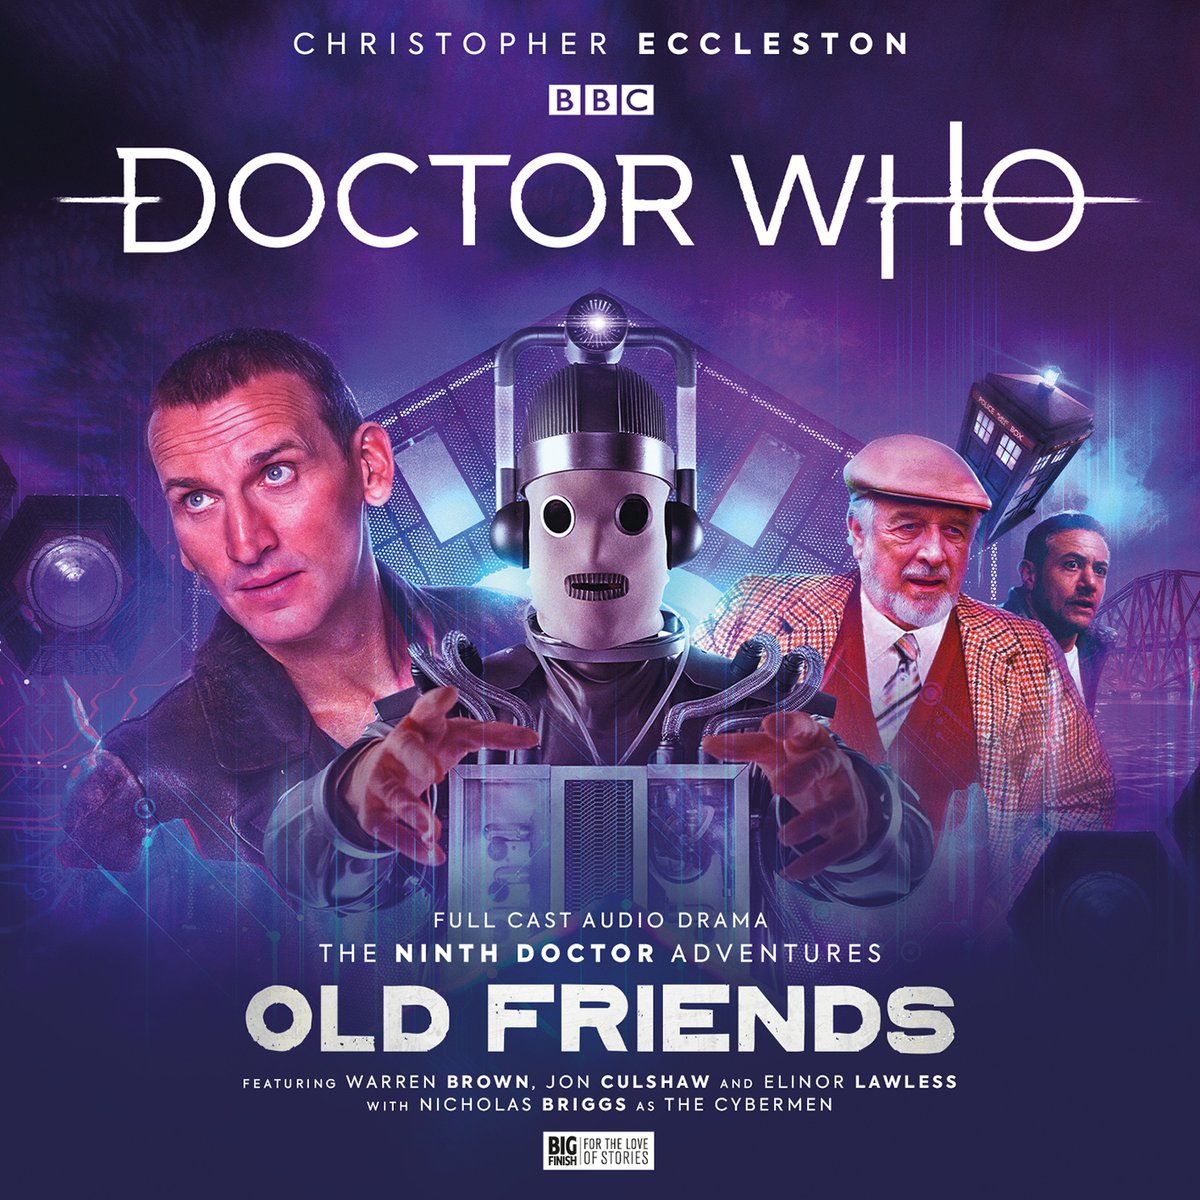 Christopher Eccleston is joined by a stellar cast, including Warren Brown, Jon Culshaw and Elinor Lawless, in #DoctorWho: Old Friends - available now! bgfn.sh/oldfriendsnews